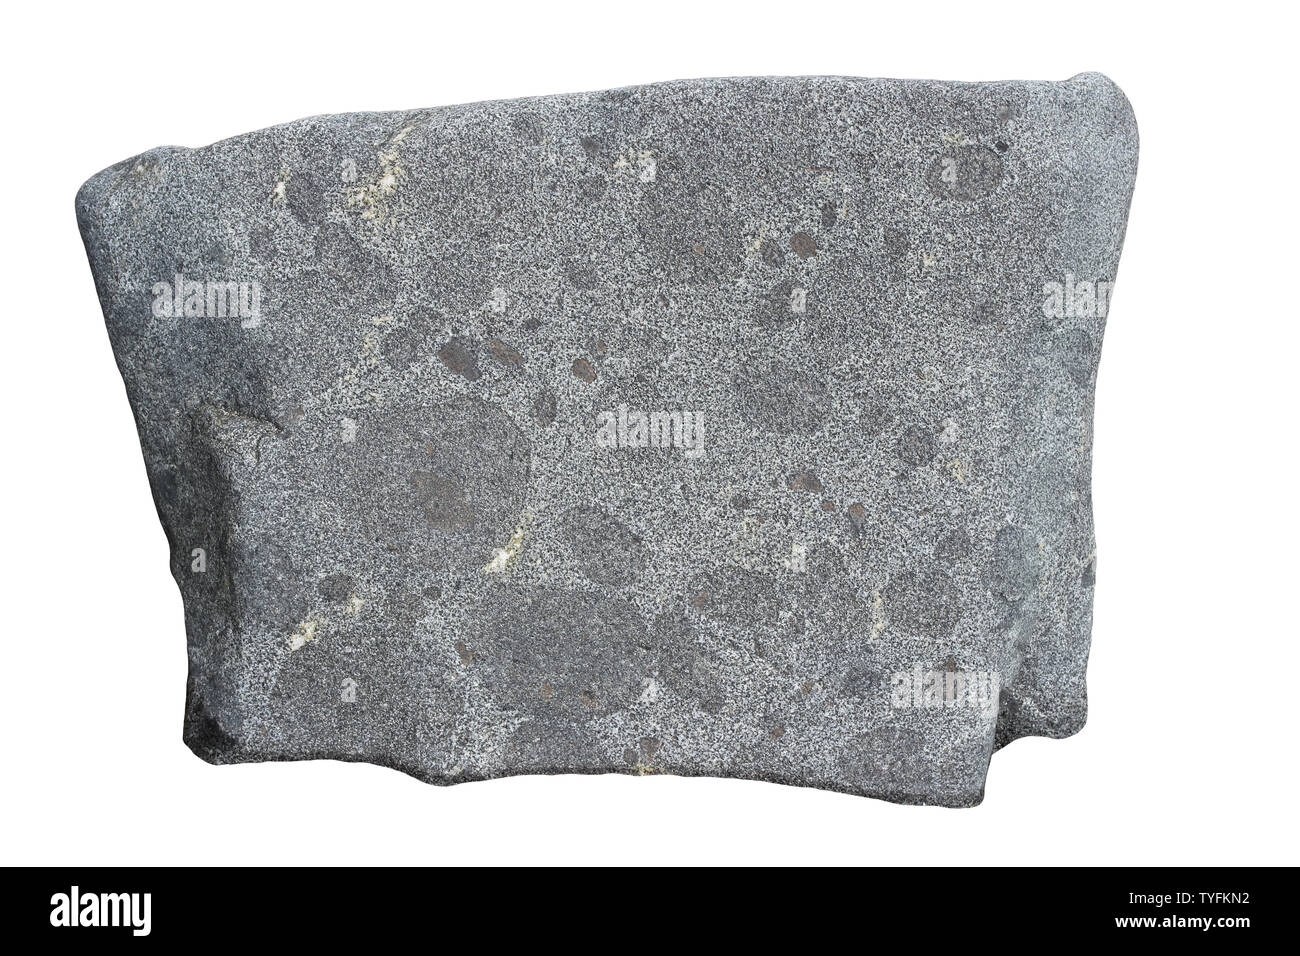 Igneous Rock containing darker xenoliths suggesting a higher Fe  & Mg composition Stock Photo